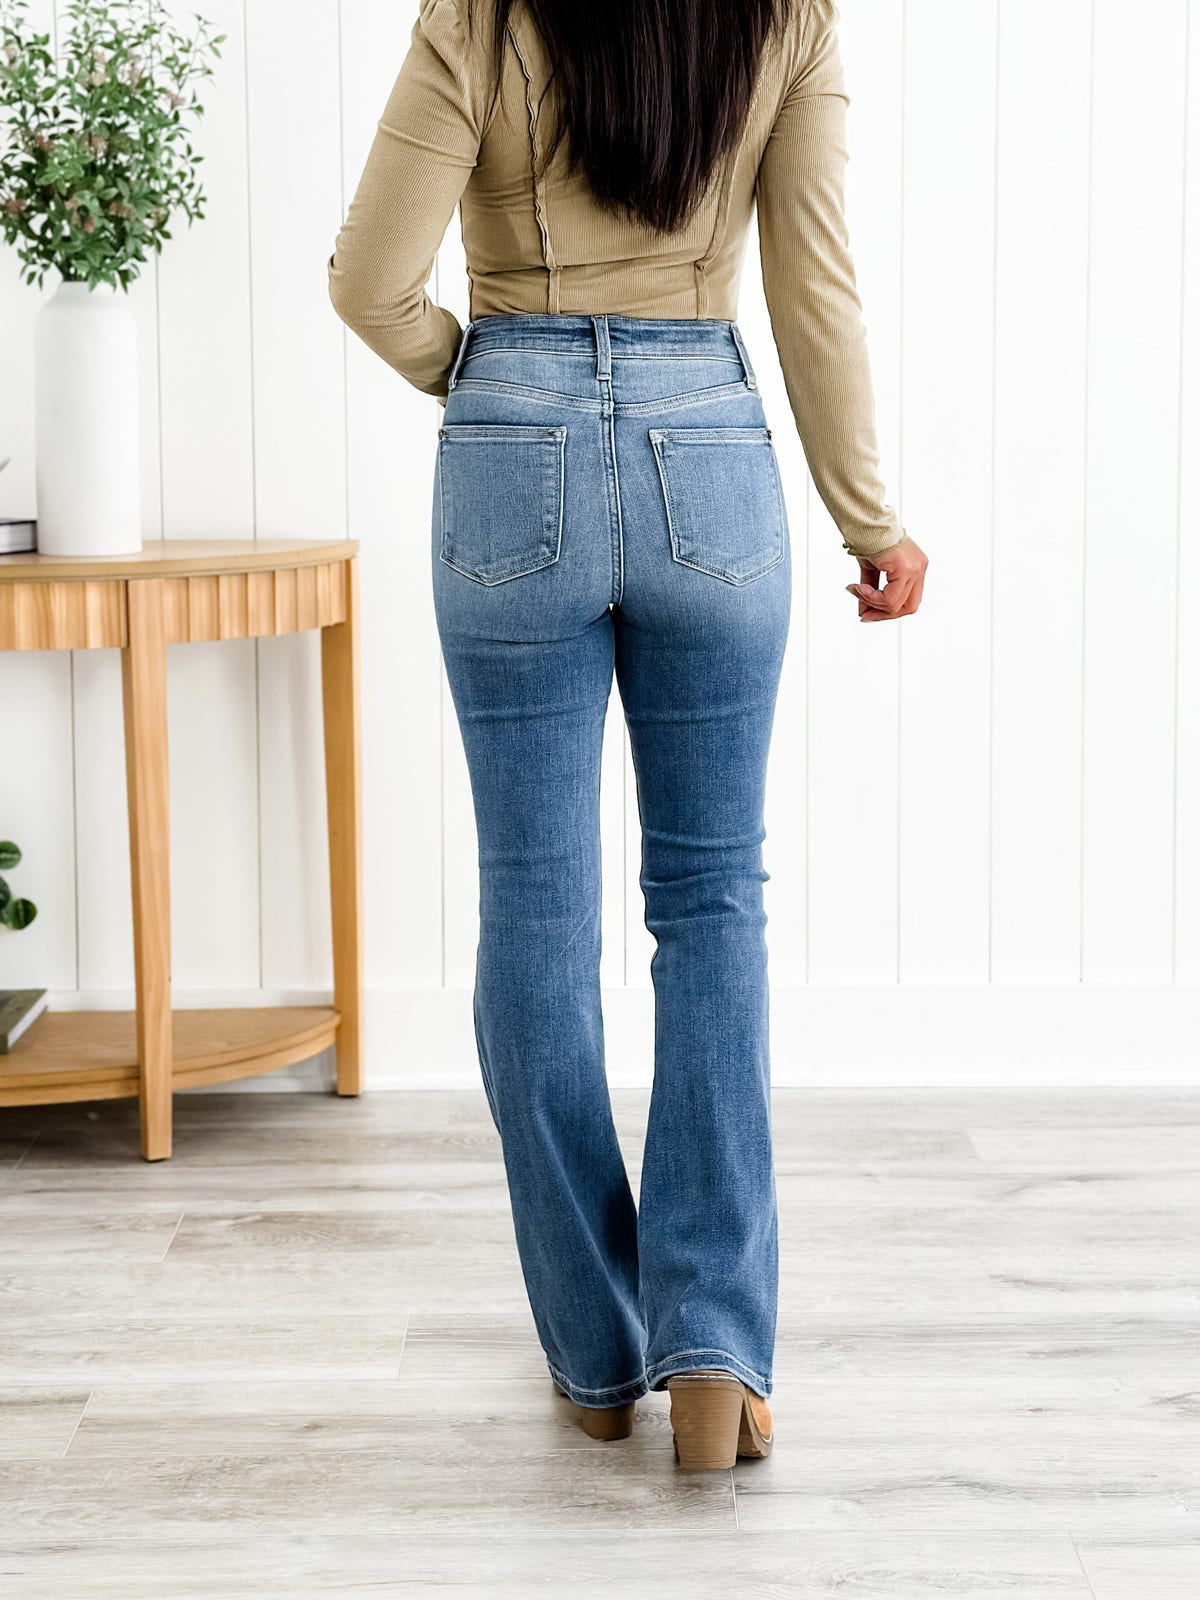 BlueCindy Holy Grail Tummy Control Bootcut Jeans